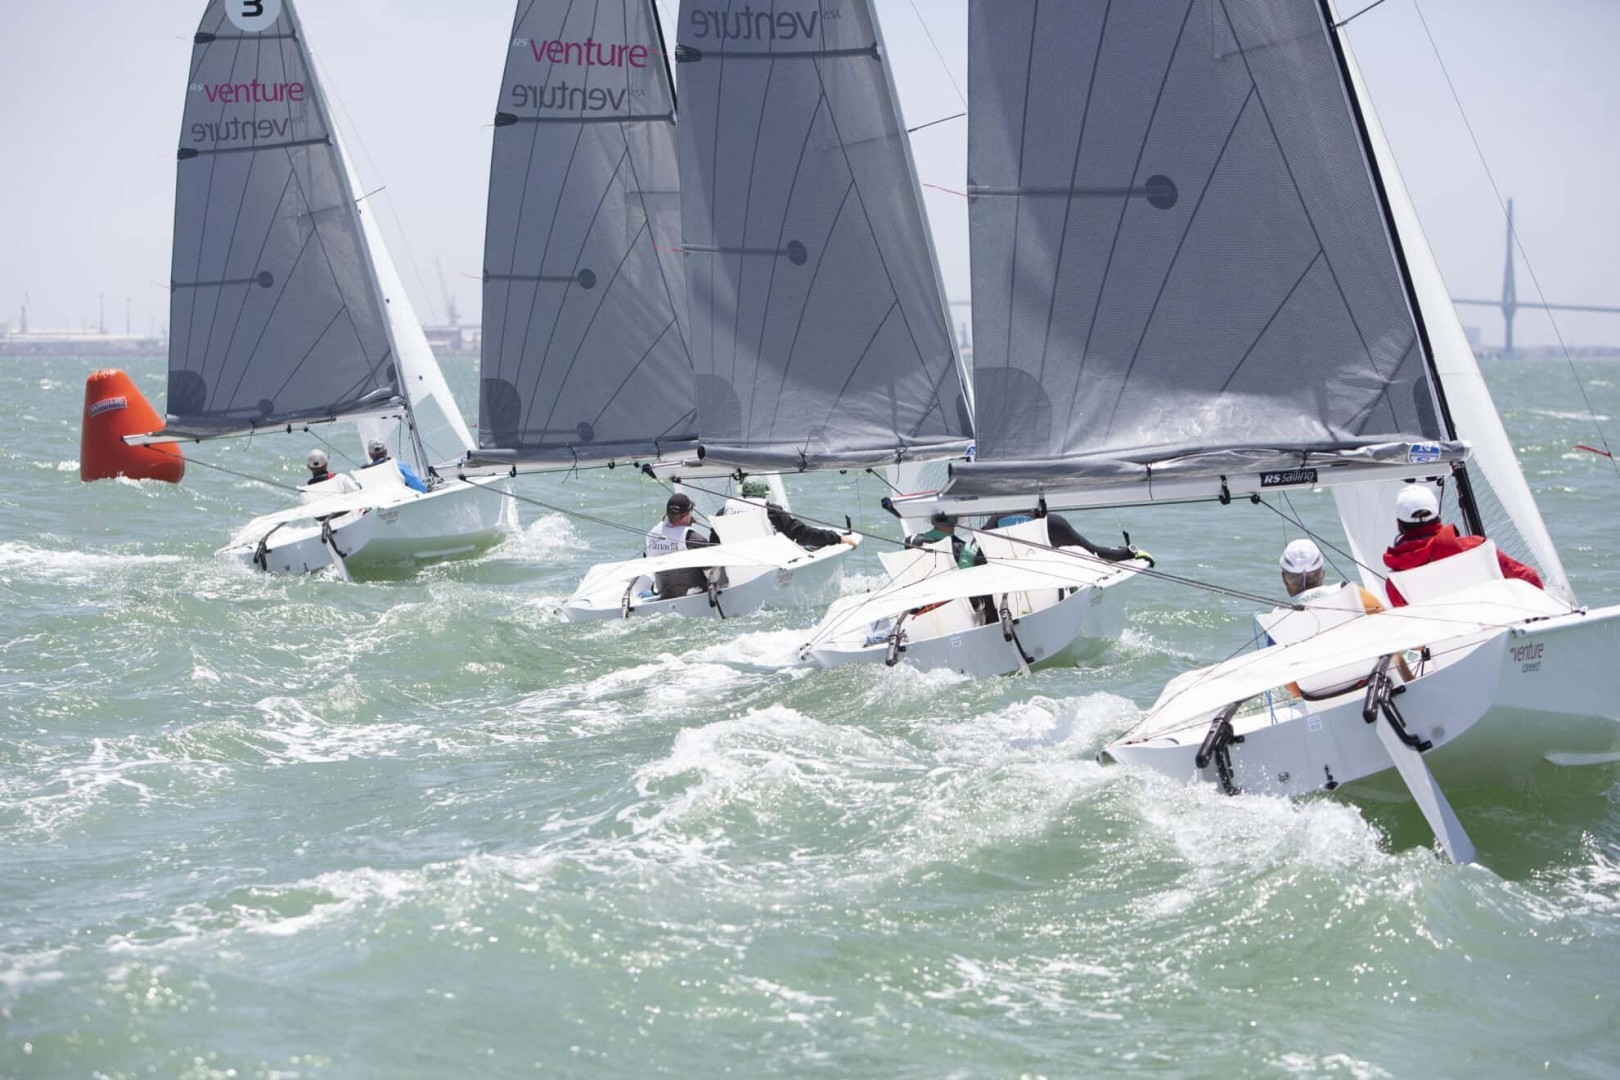 World First U25 Para Sailing World Championship set to debut in Dutch waters this summer